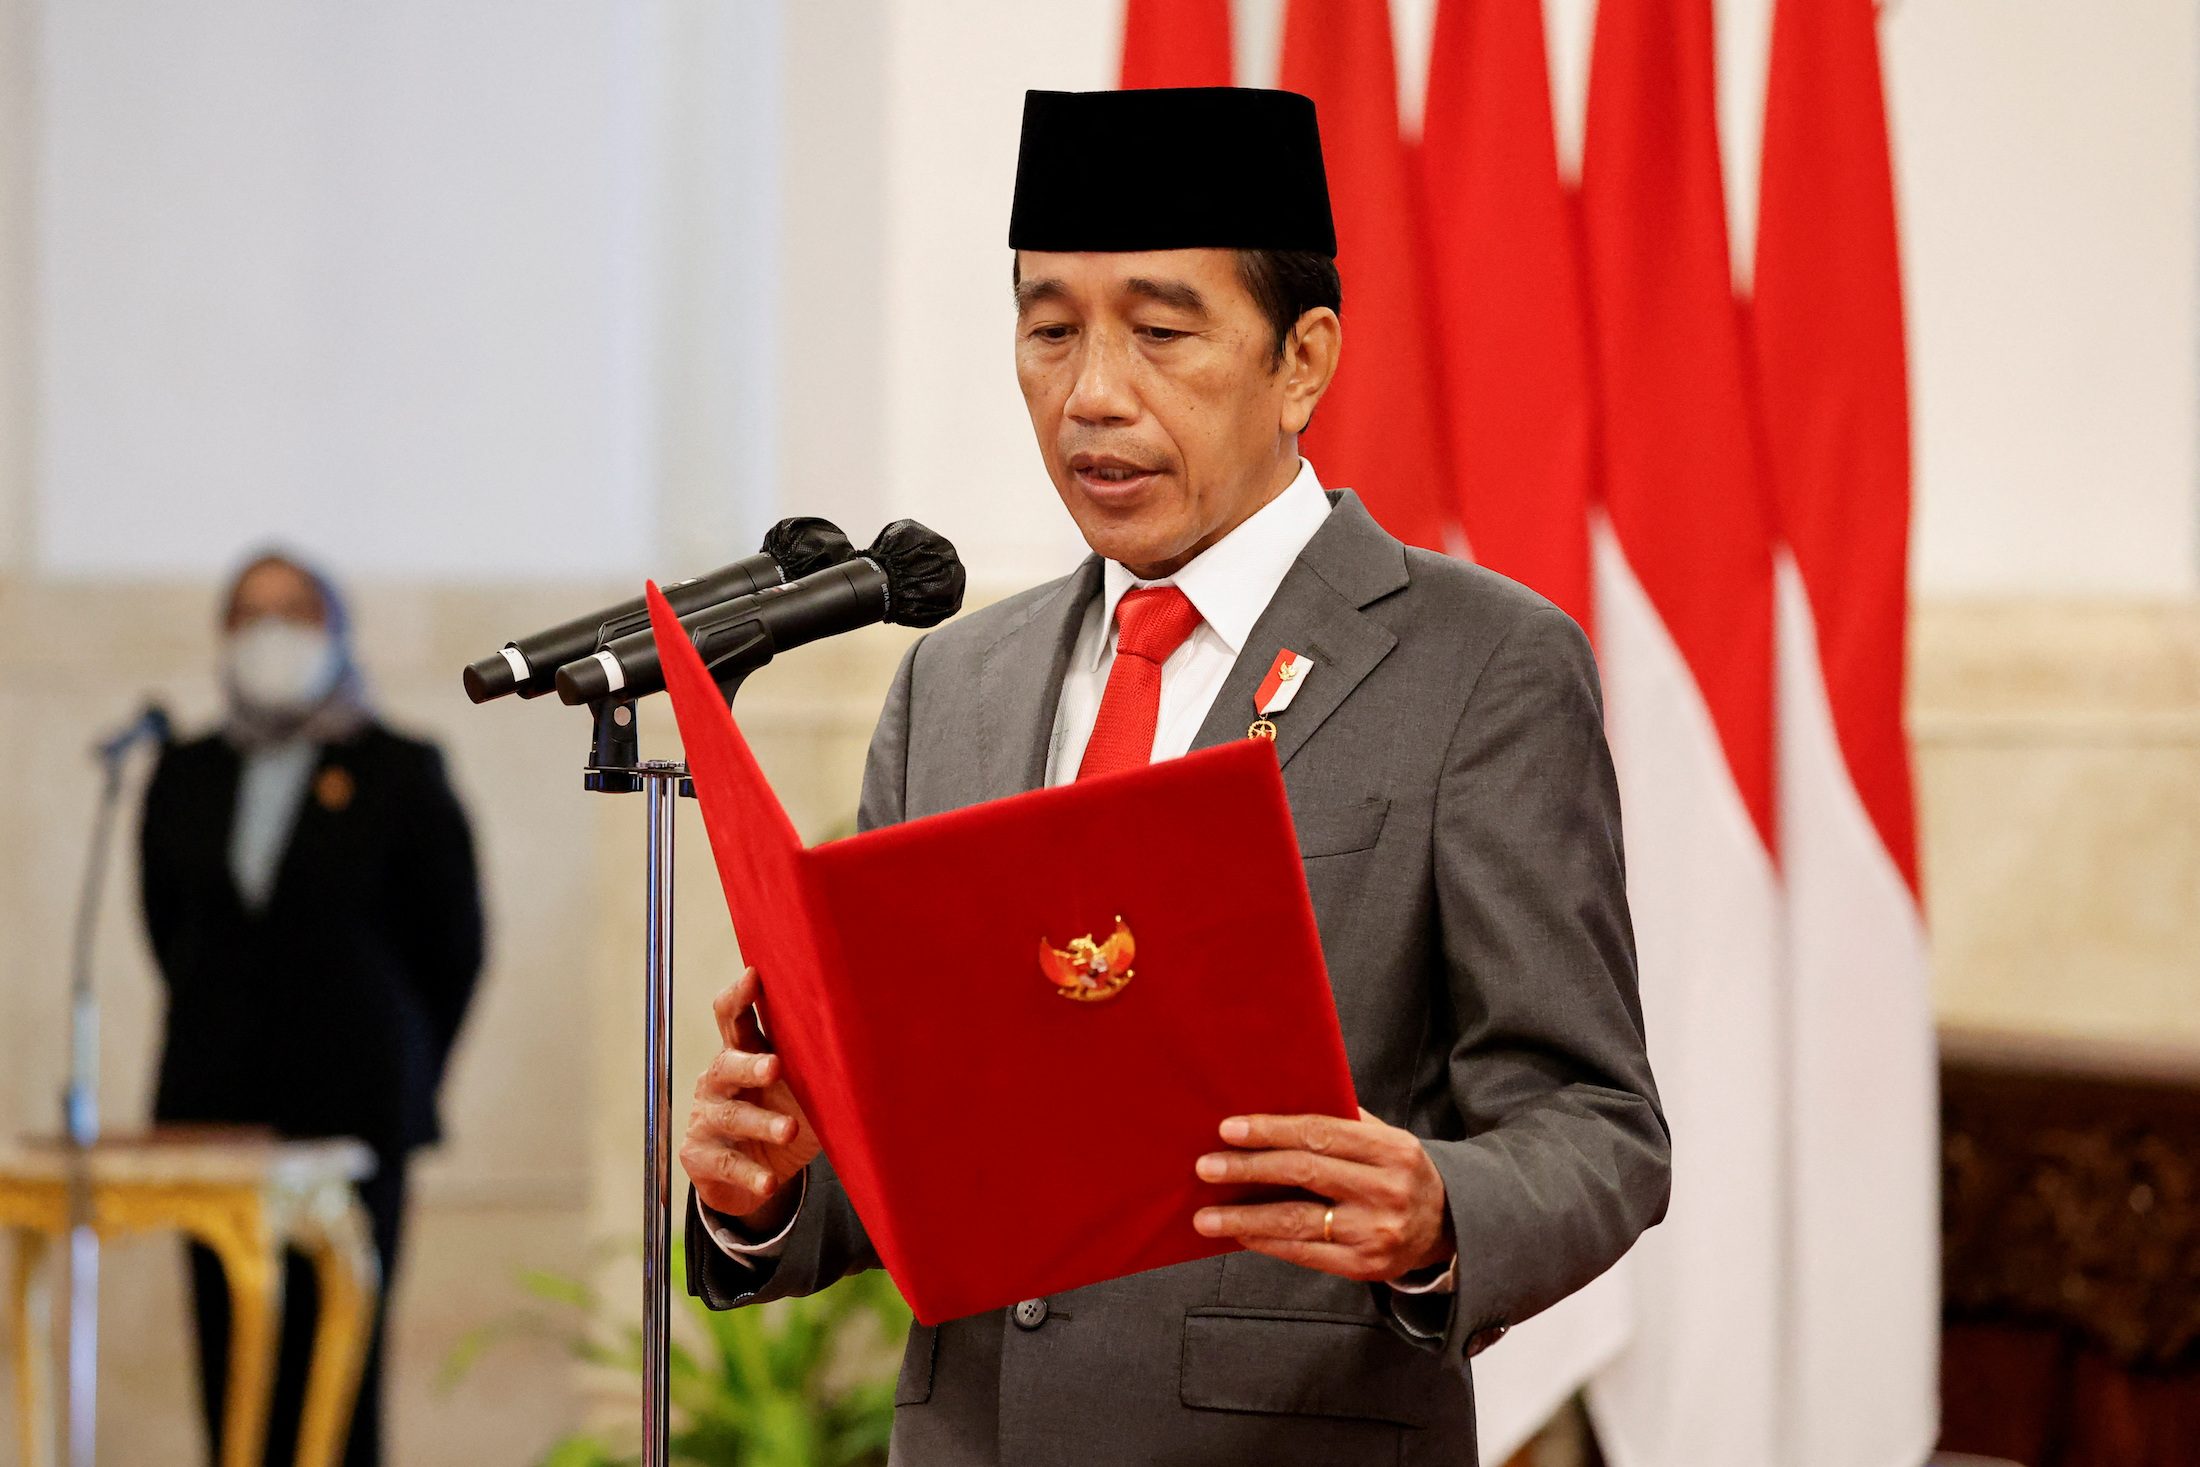 Jokowi regrets Indonesia’s bloody past, victims want accountability